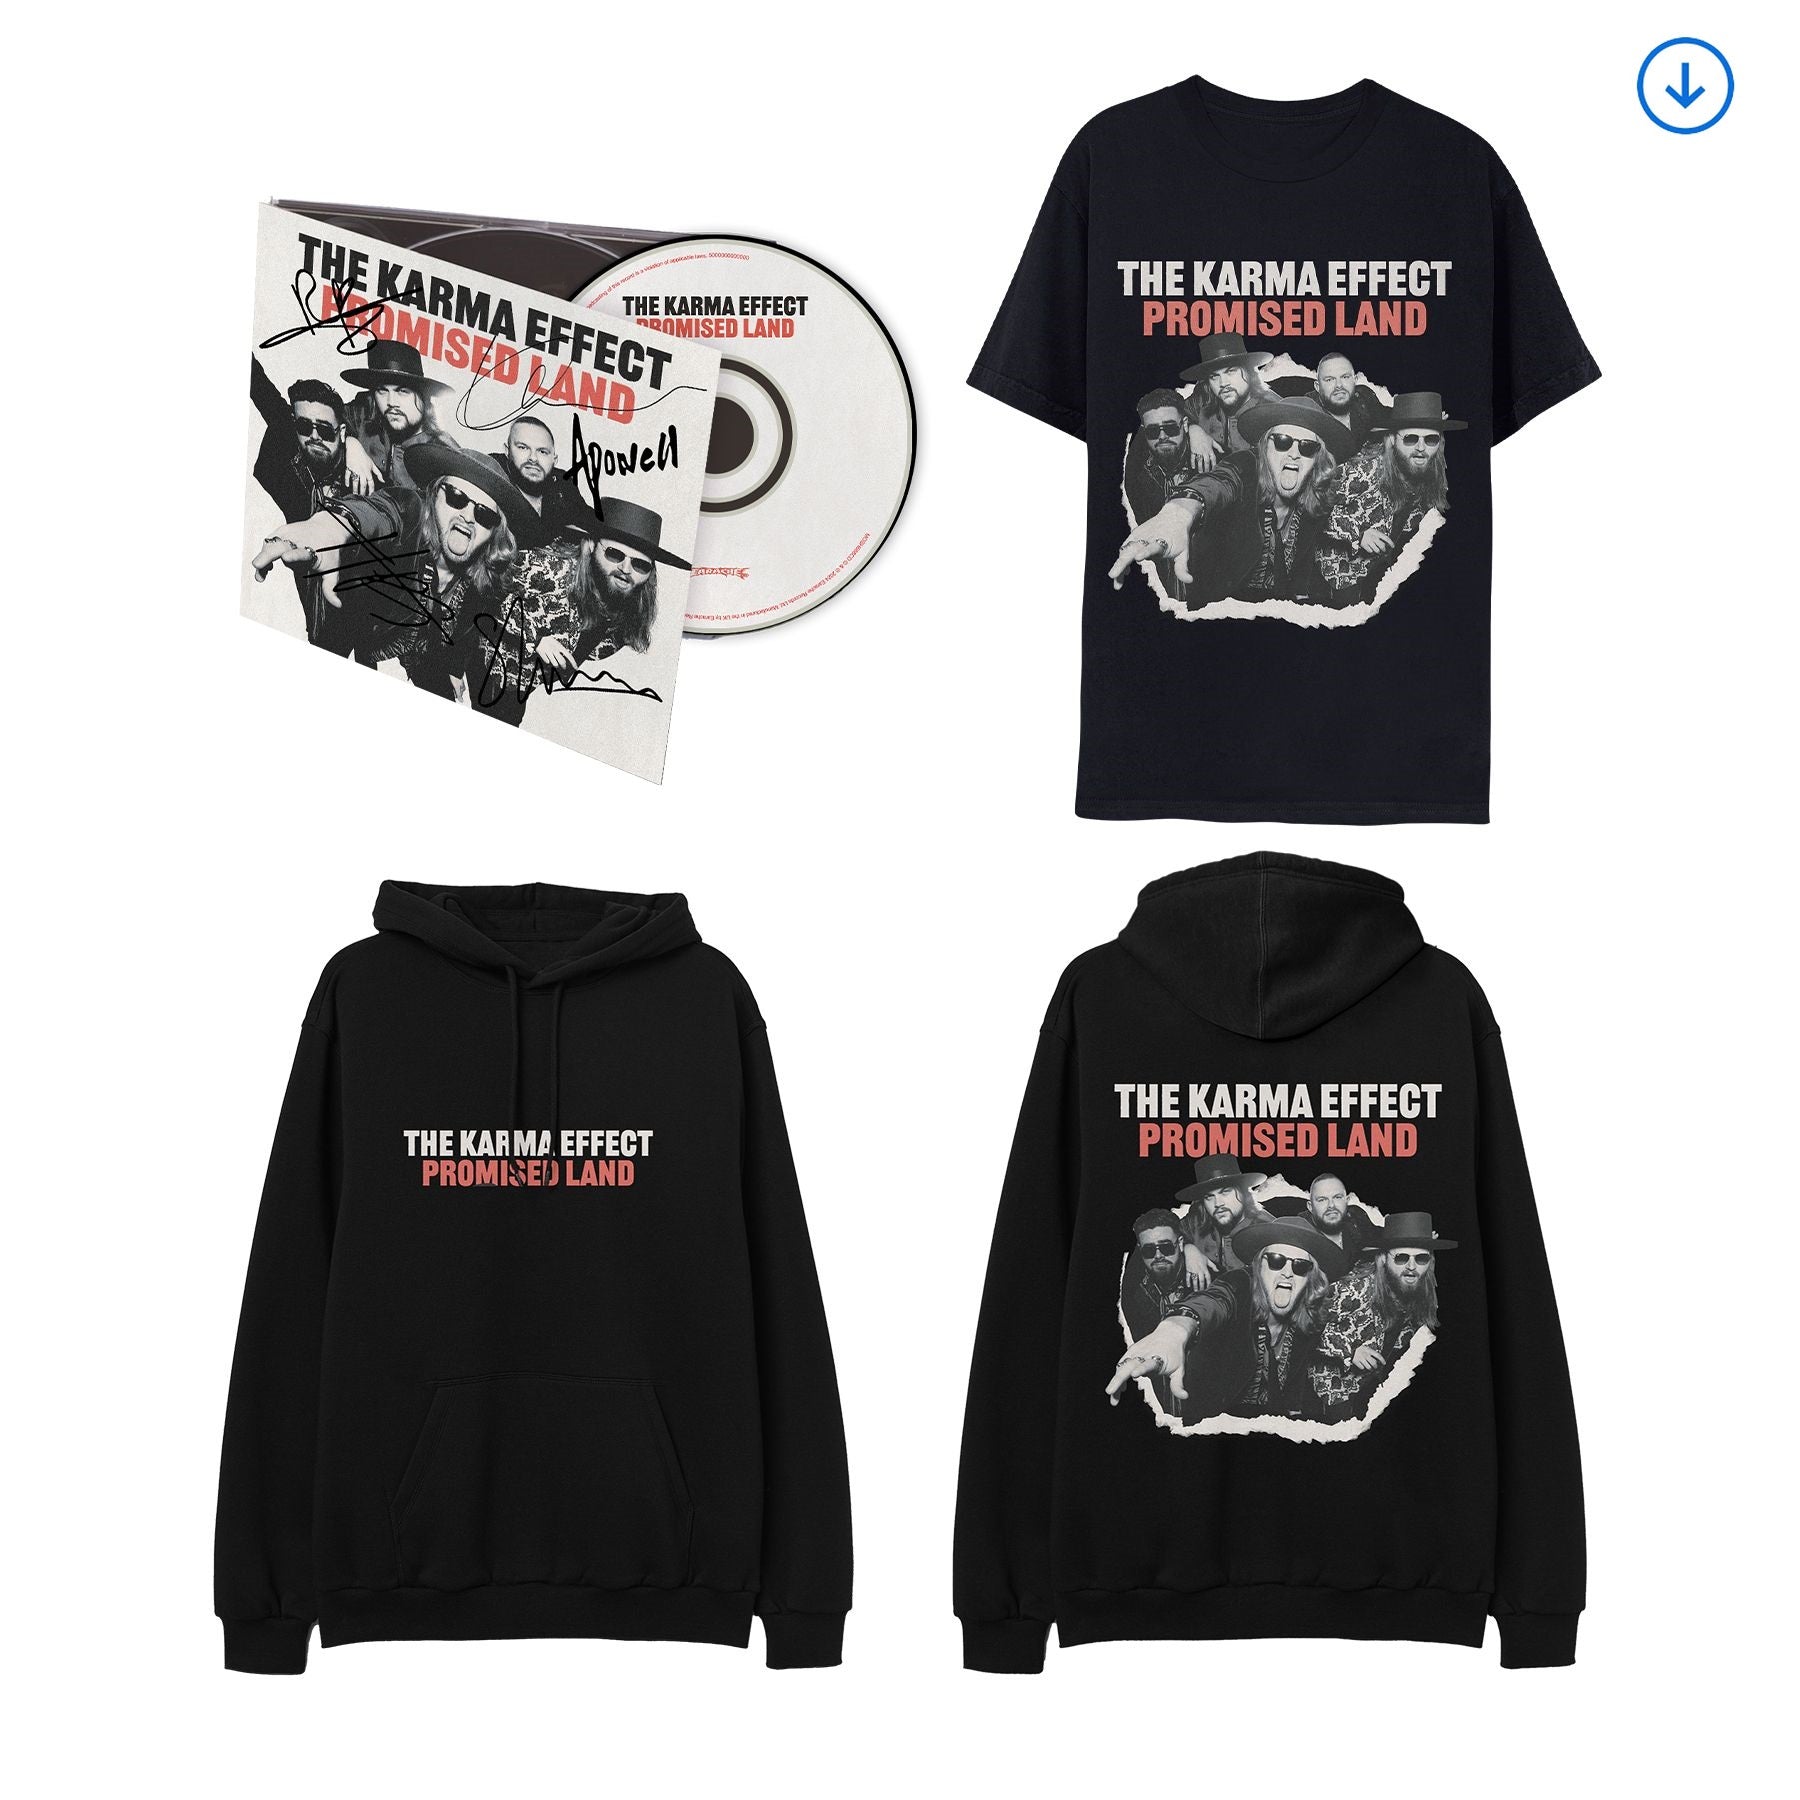 The Karma Effect "Promised Land" Signed CD, Download, T shirt and Hoodie